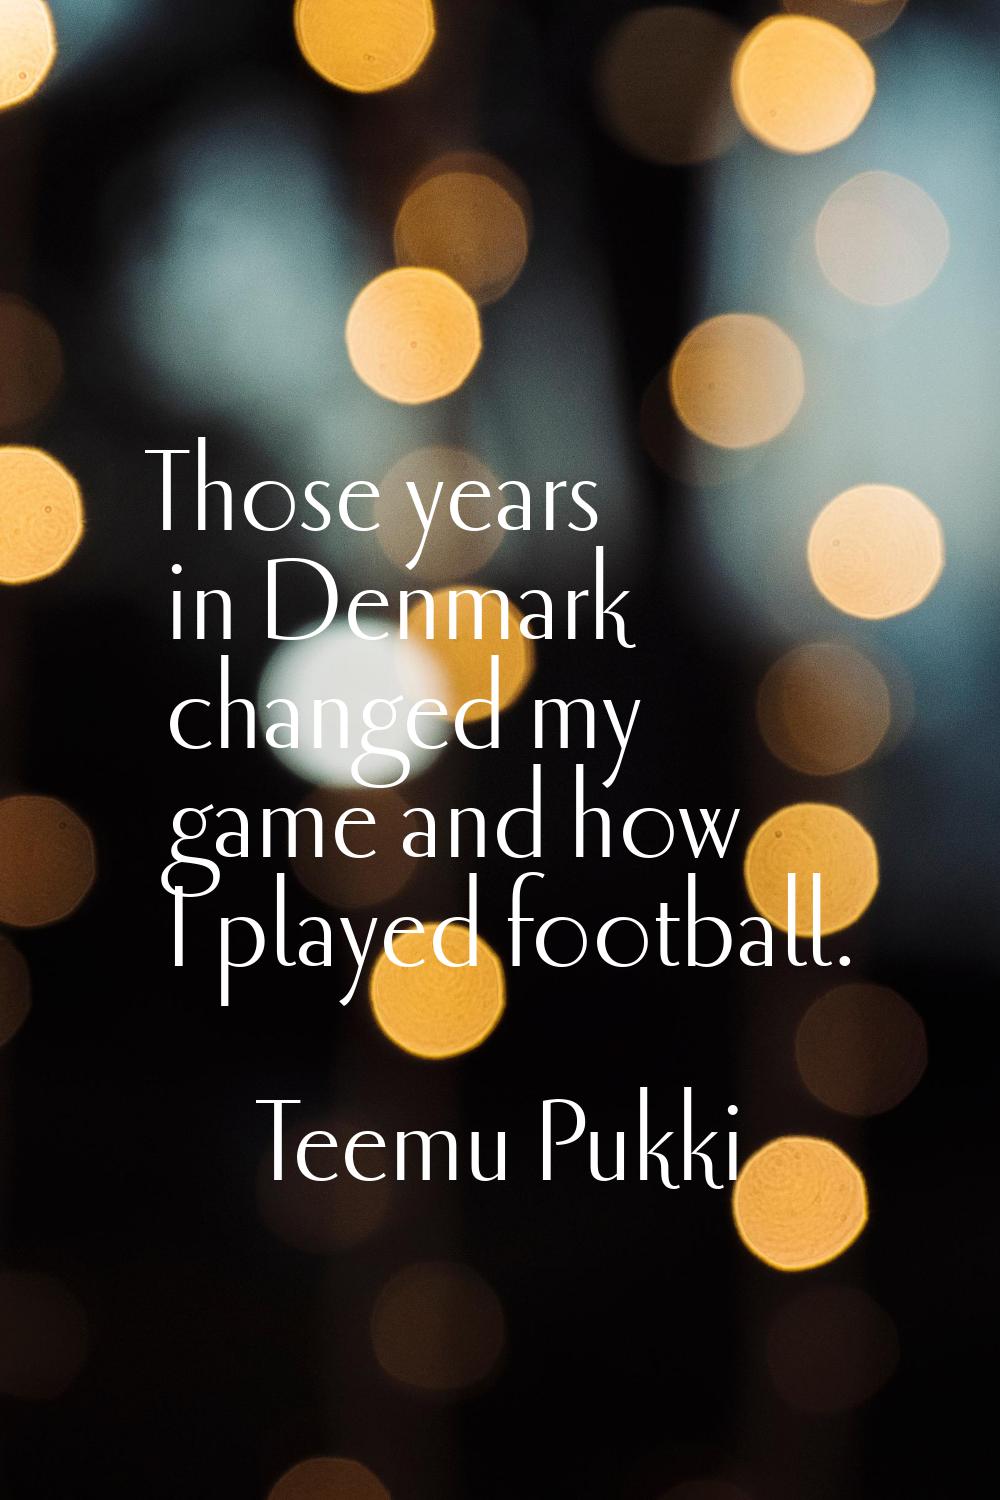 Those years in Denmark changed my game and how I played football.